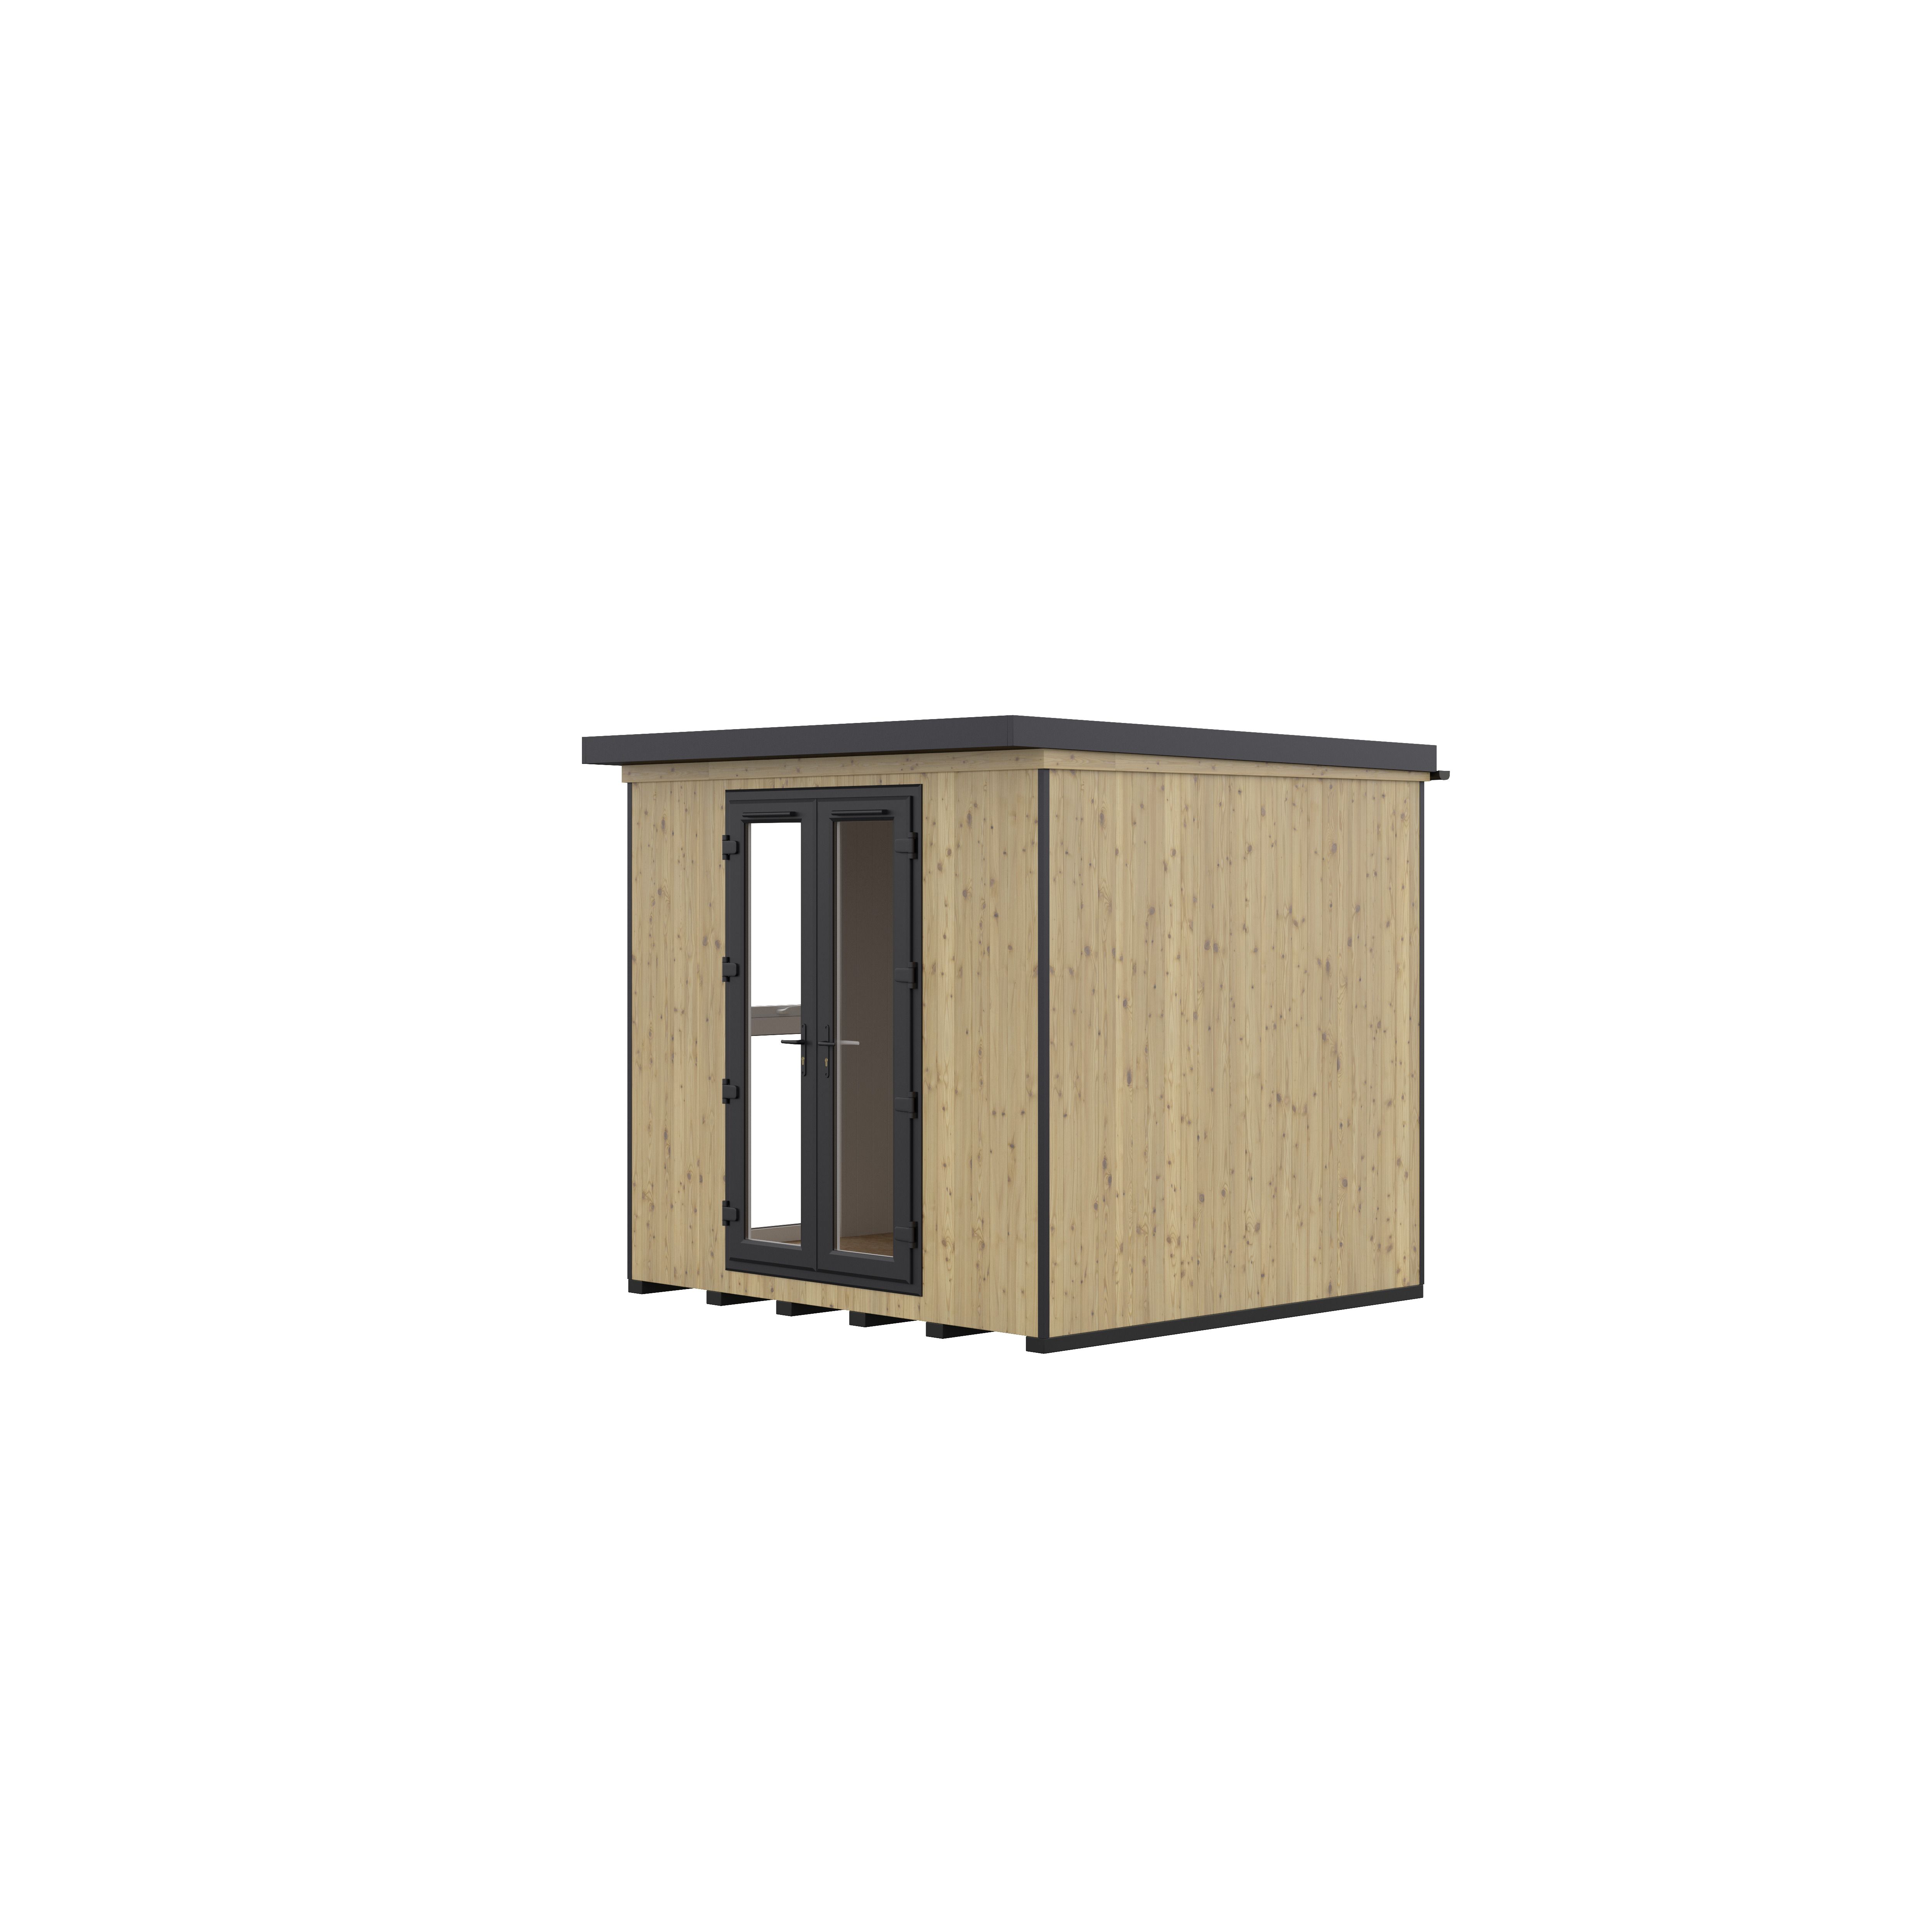 GoodHome Semora 8x9 ft with Double door Pent Garden room 2.4m x 2.6m (Base included) - Assembly service of building & foundations included